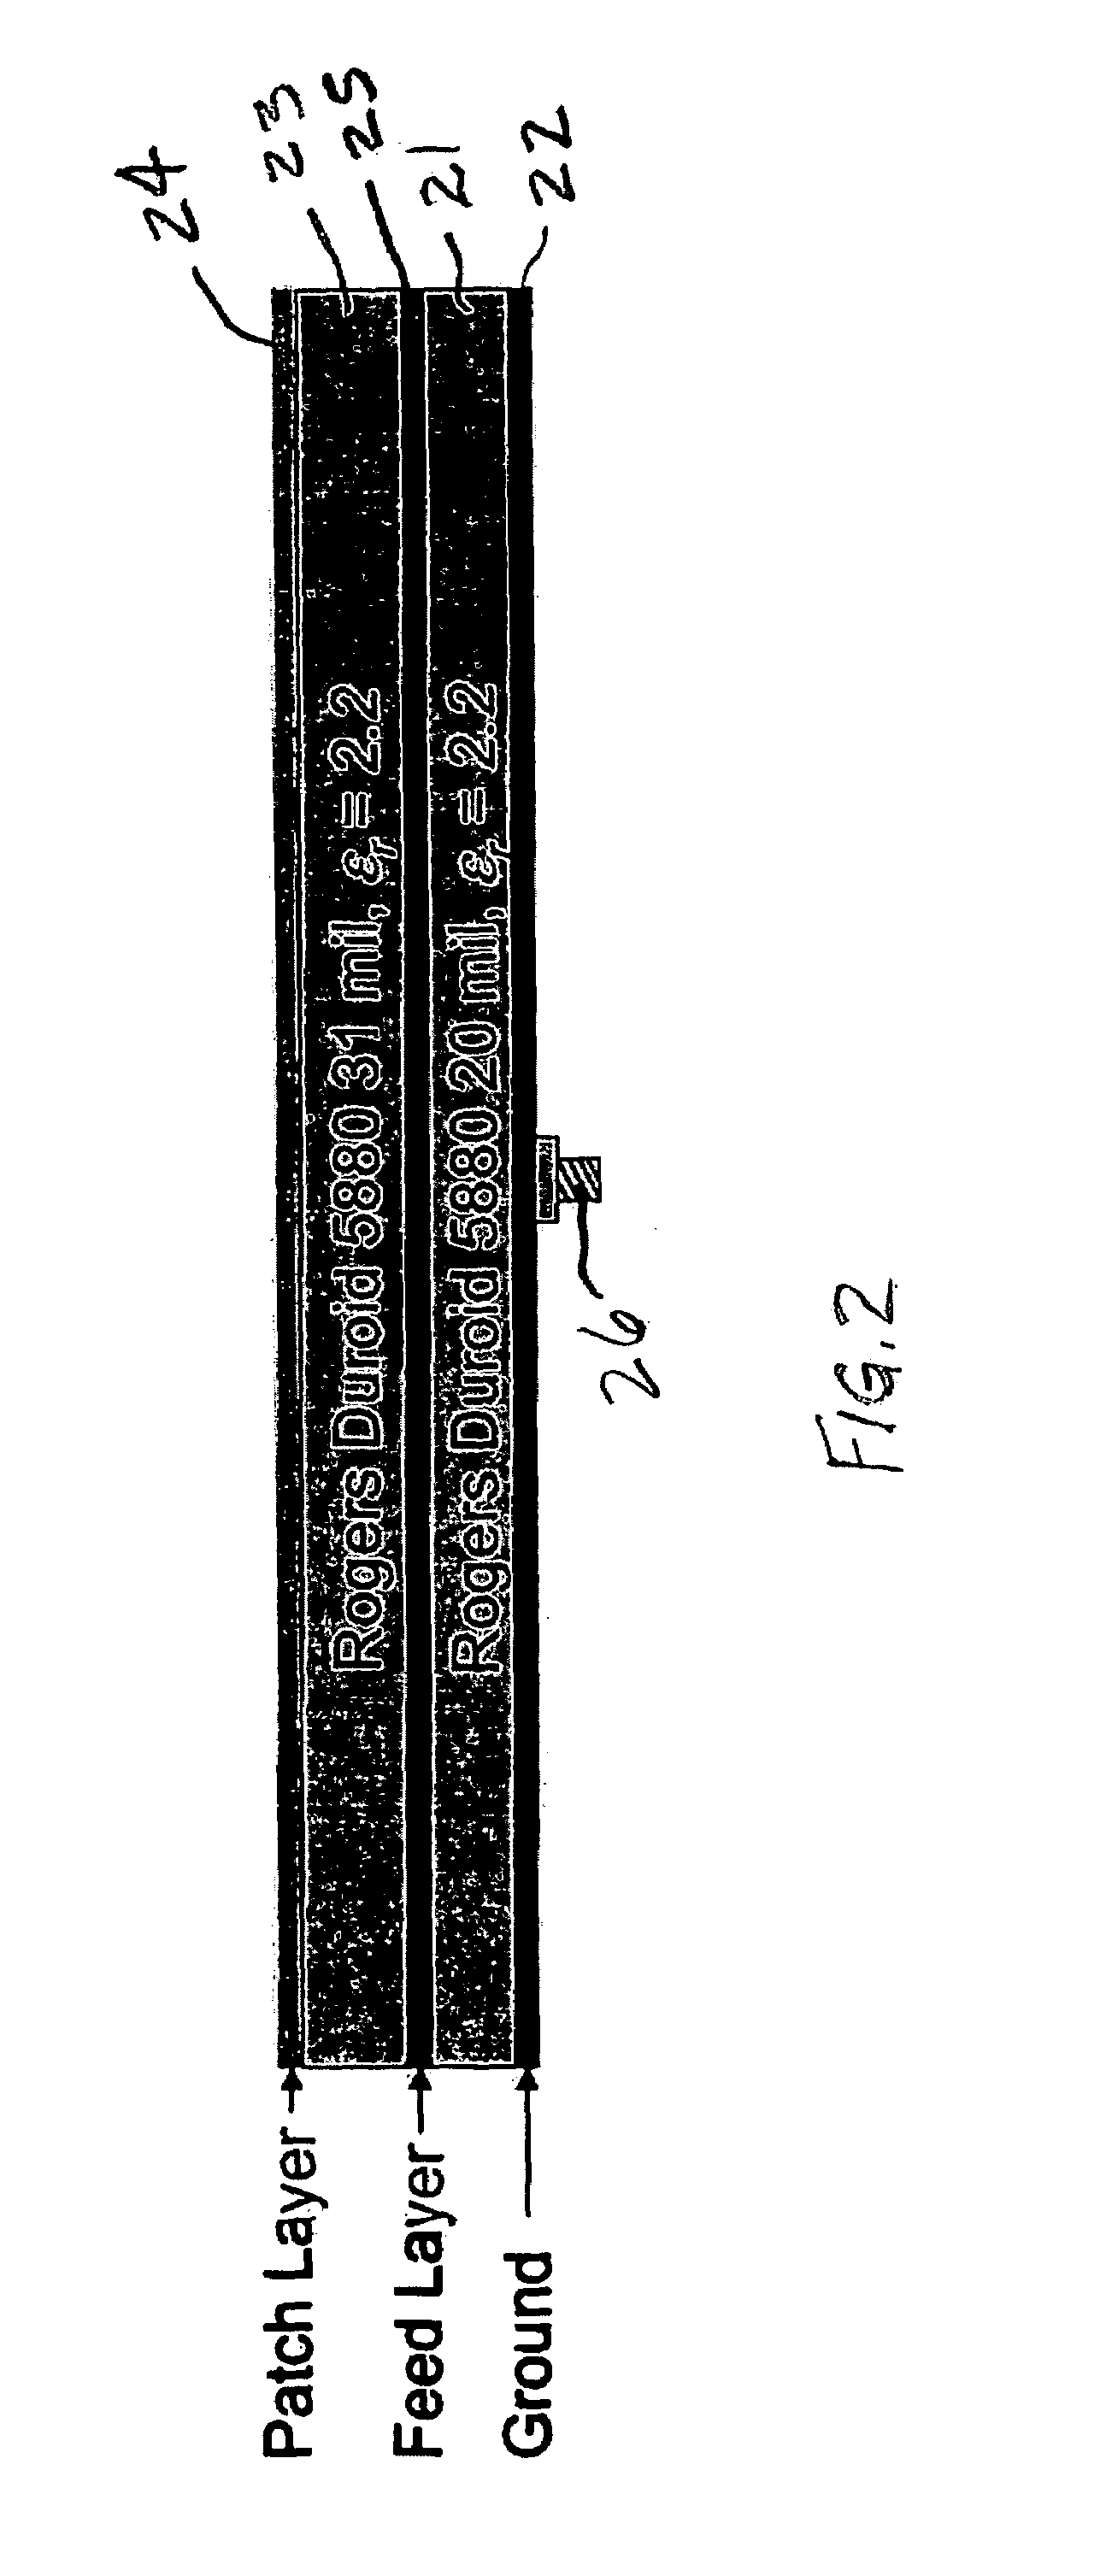 Reproducible, high performance patch antenna array apparatus and method of fabrication